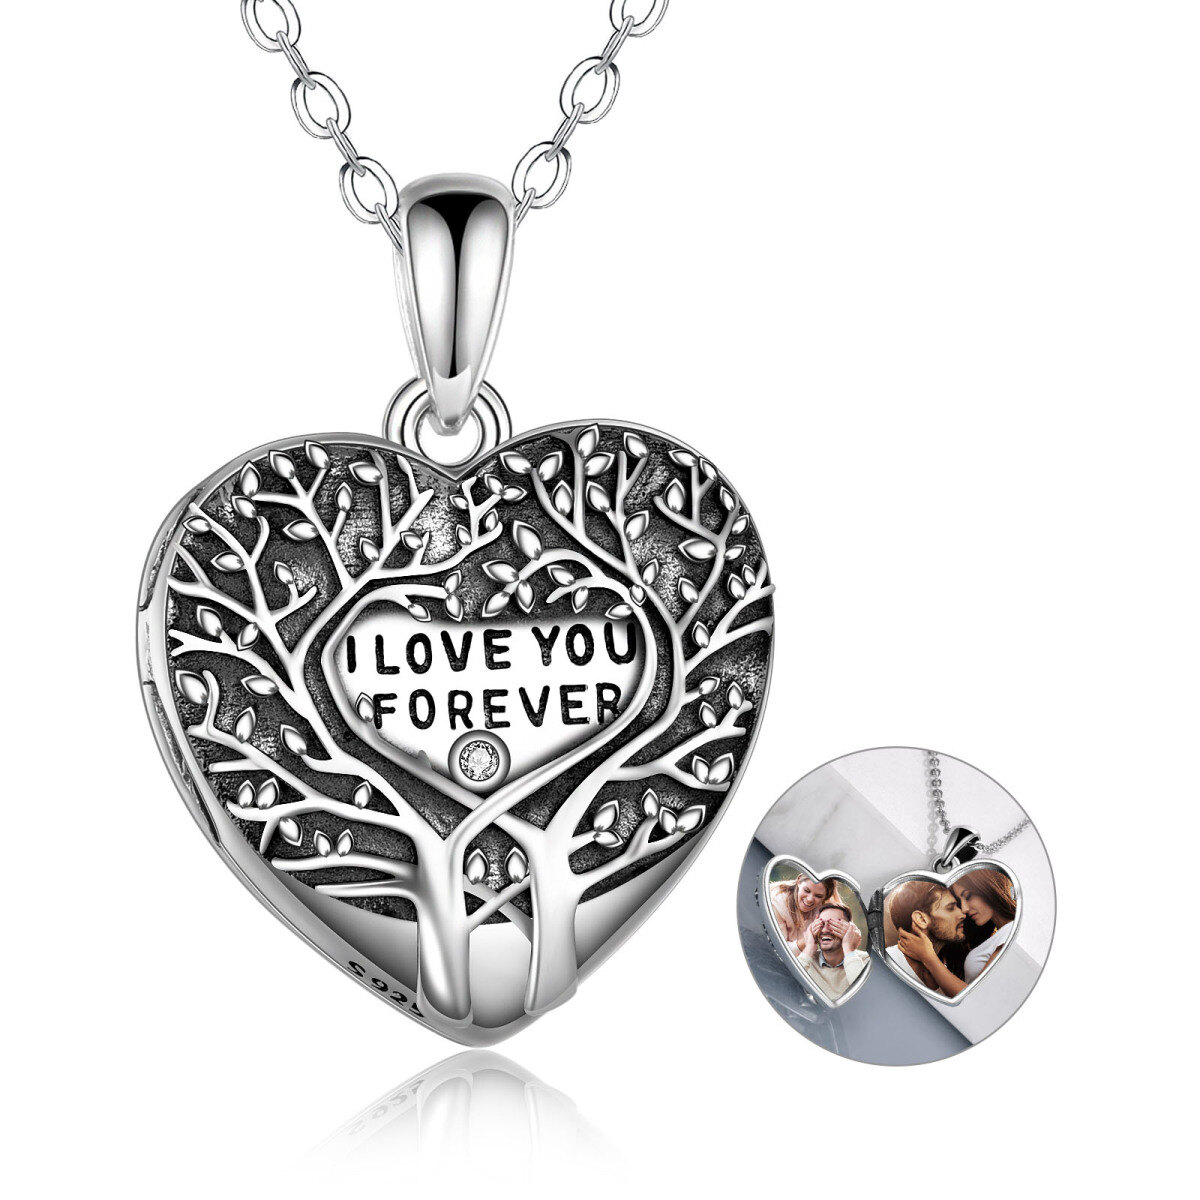 Sterling Silver Circular Shaped Cubic Zirconia Tree Of Life & Heart Personalized Photo Locket Necklace with Engraved Word-1